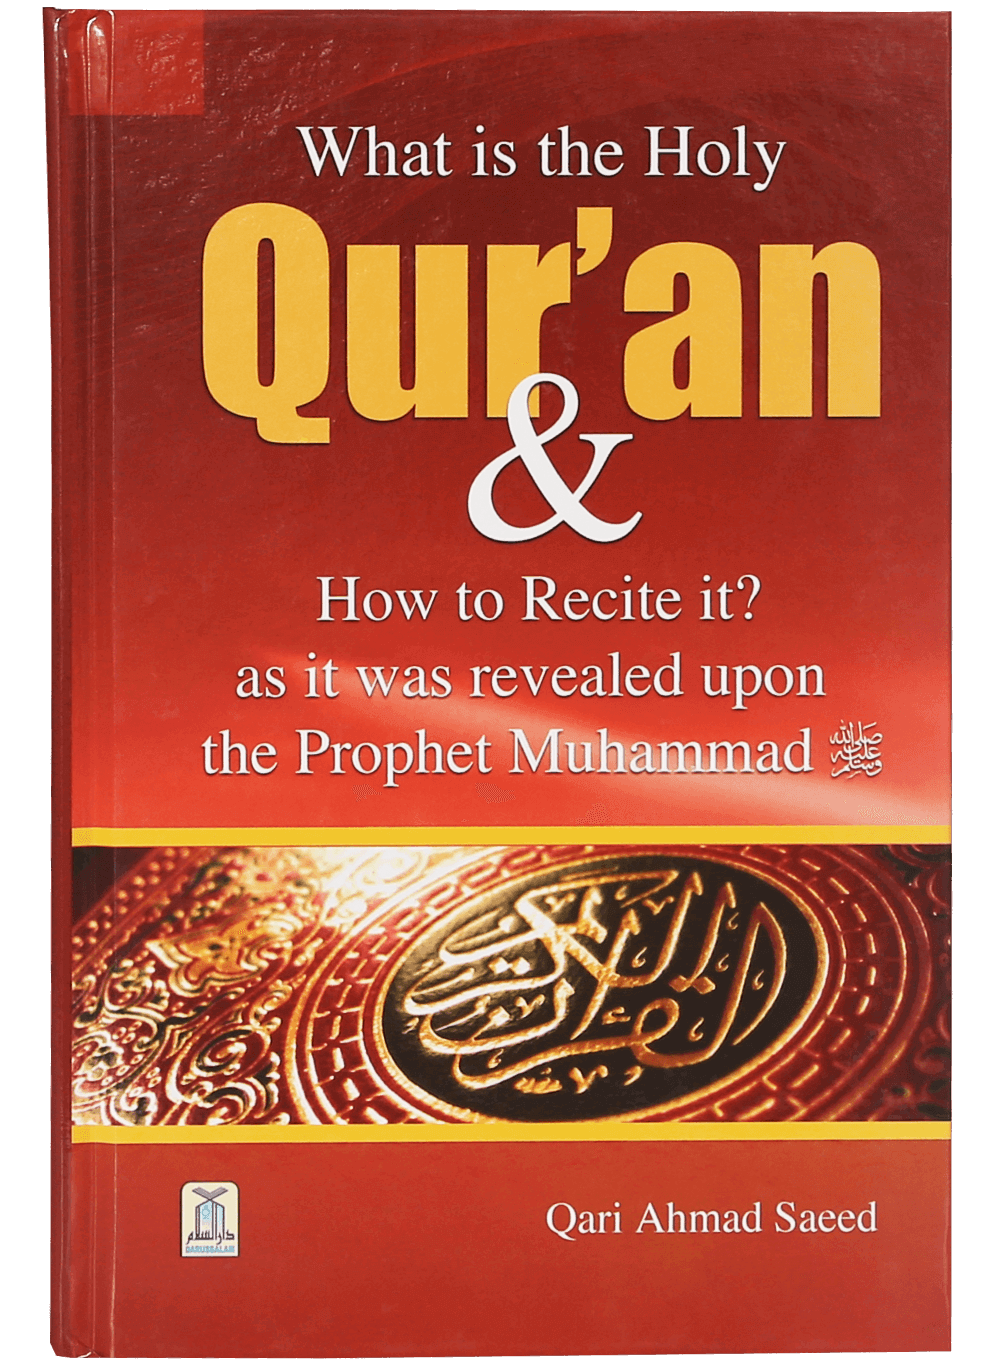 What Is The Quran And How To Recite It? A Book of how to recite the Arabic in the Quran